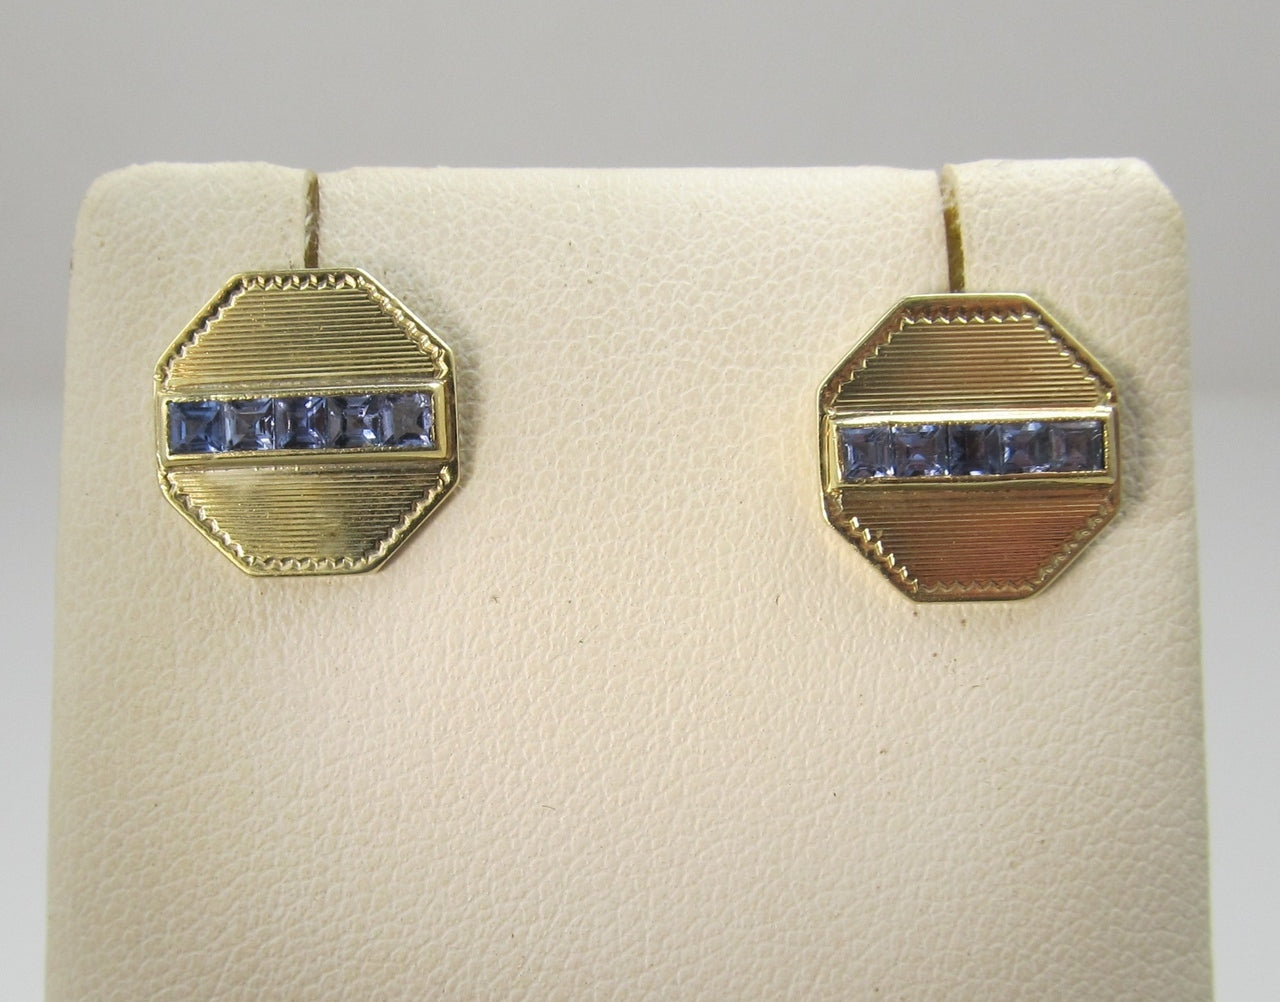 Converted cufflink earrings with sapphires, victorious cape may